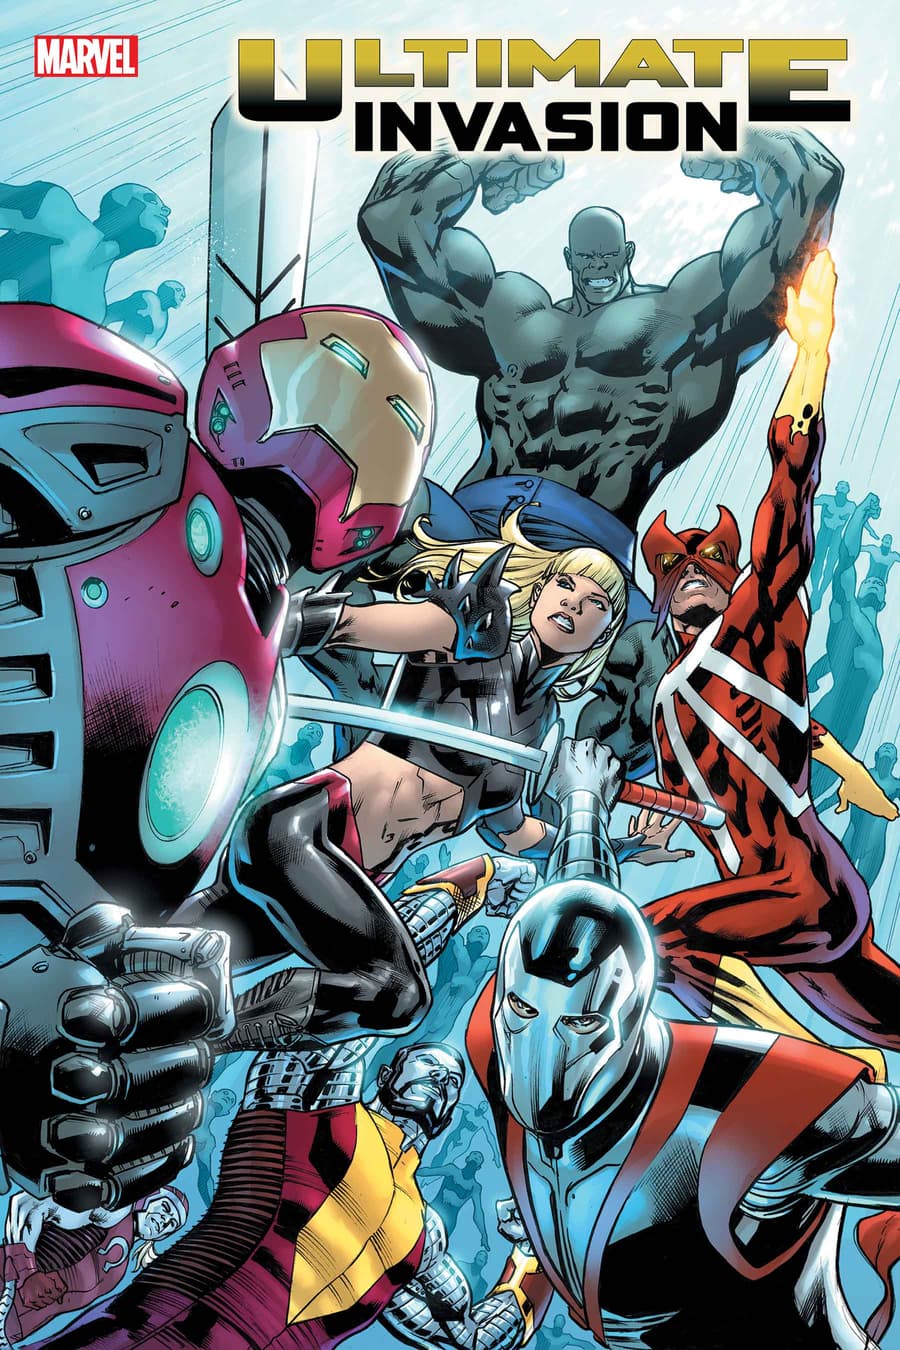 ULTIMATE INVASION #3 cover by Bryan Hitch